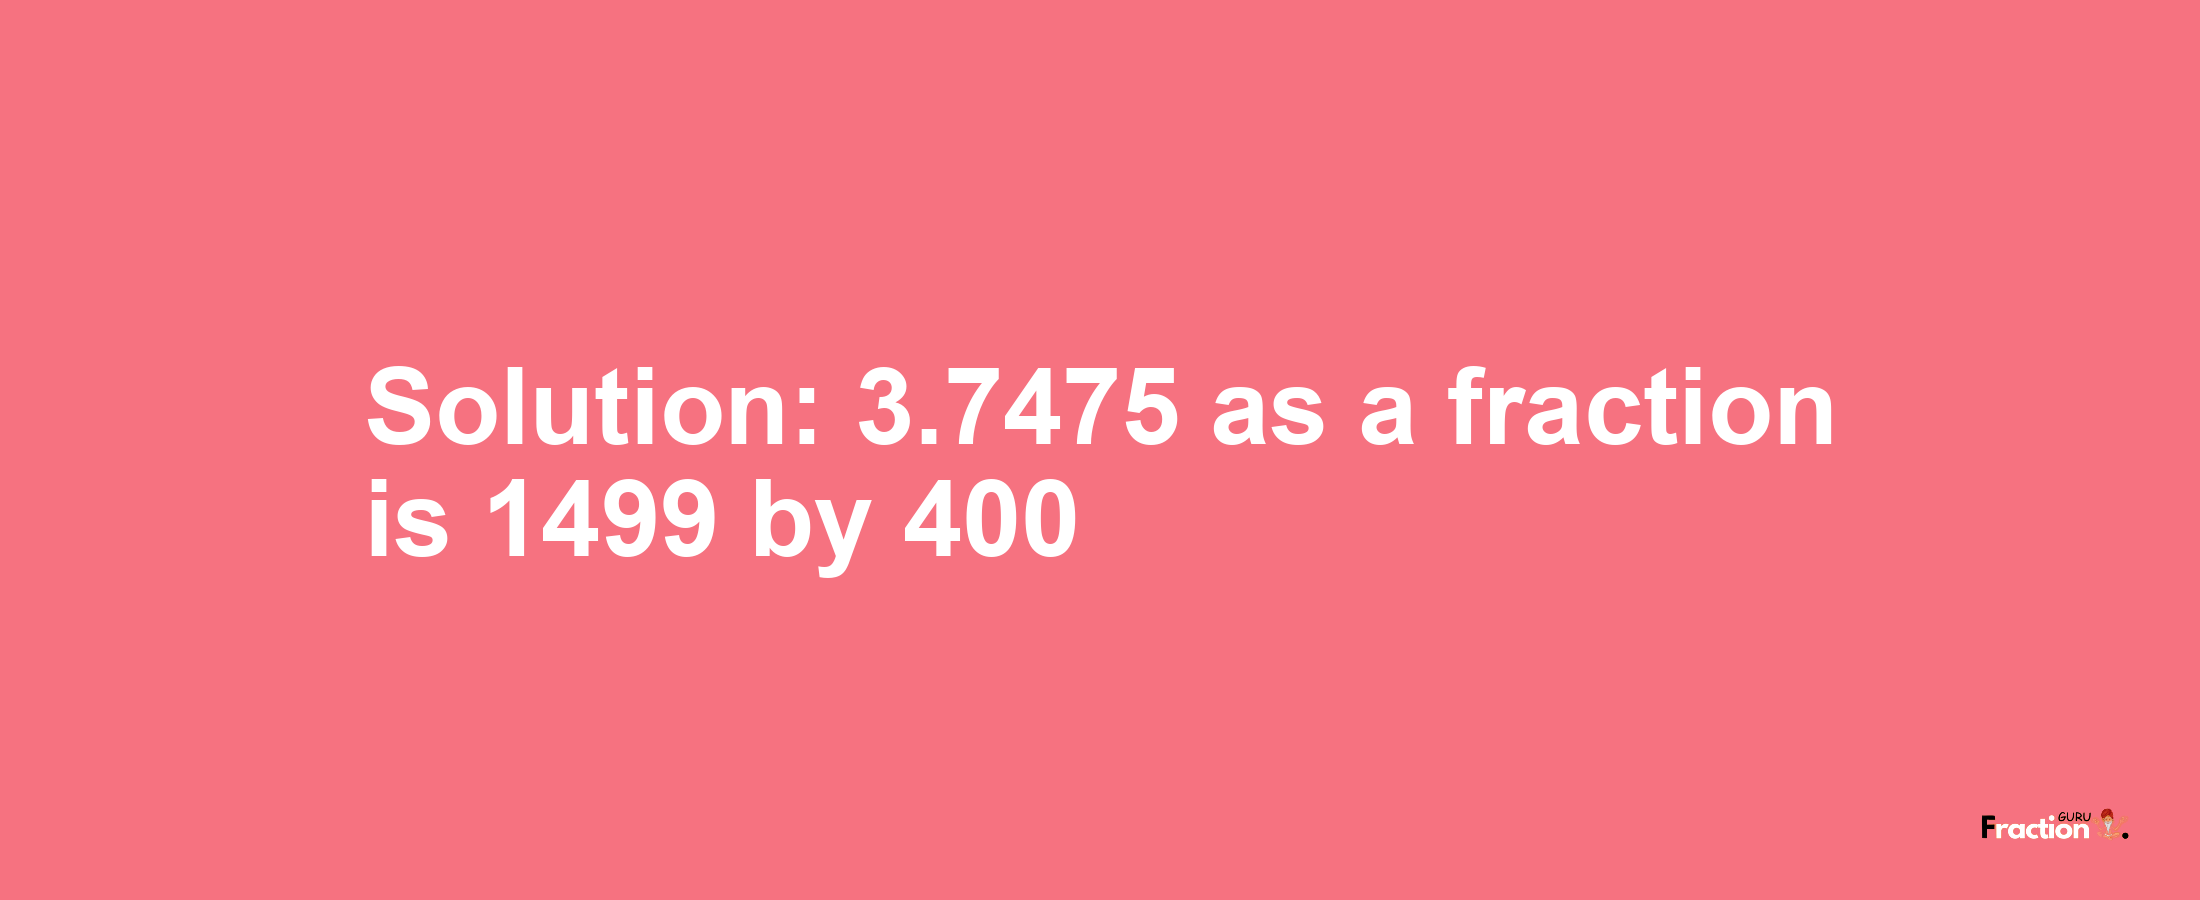 Solution:3.7475 as a fraction is 1499/400